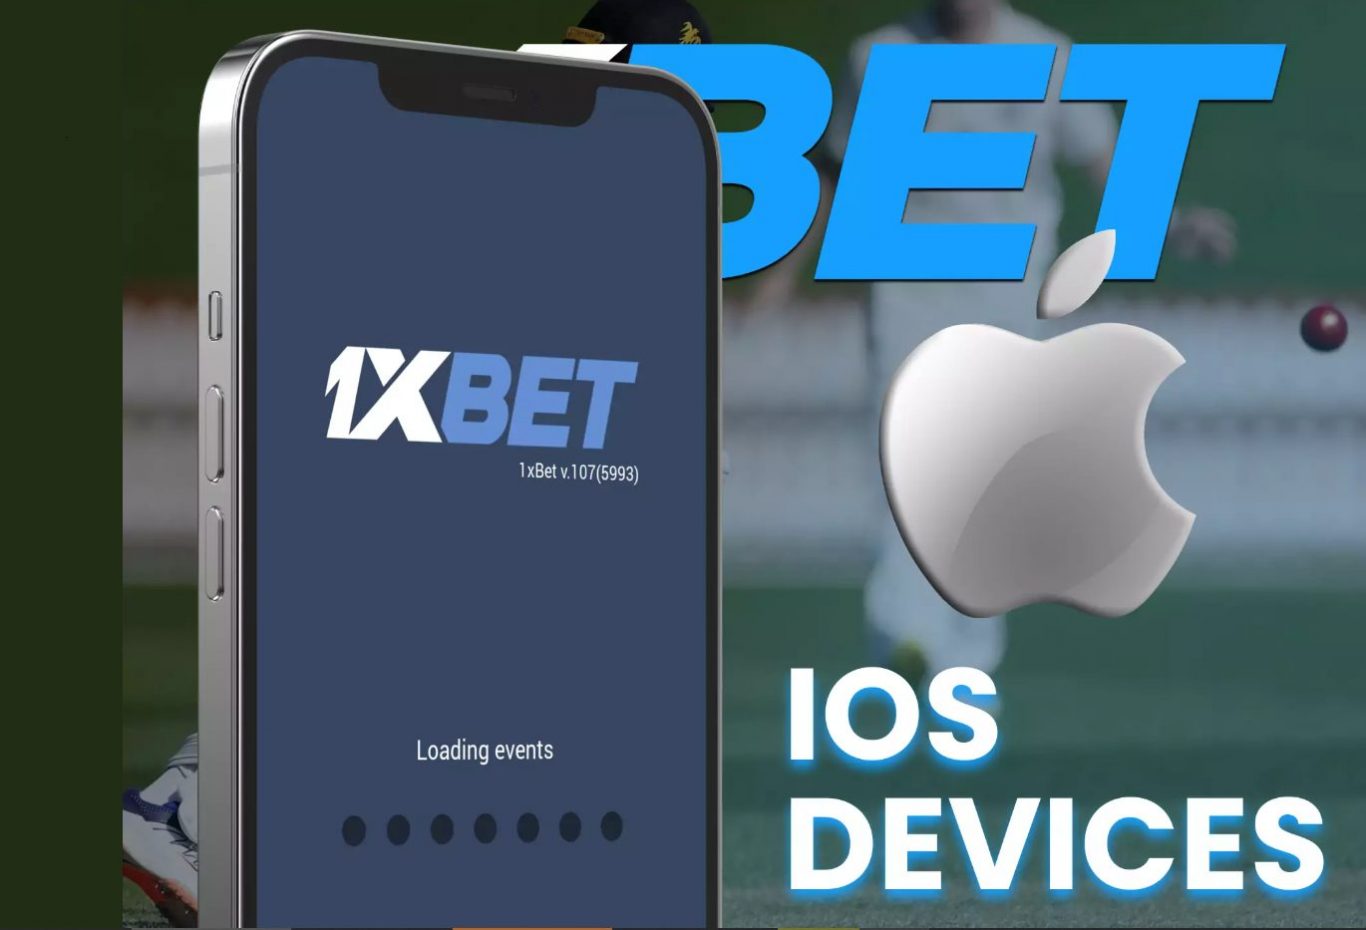 Reasons to Download 1xBet iOS Application